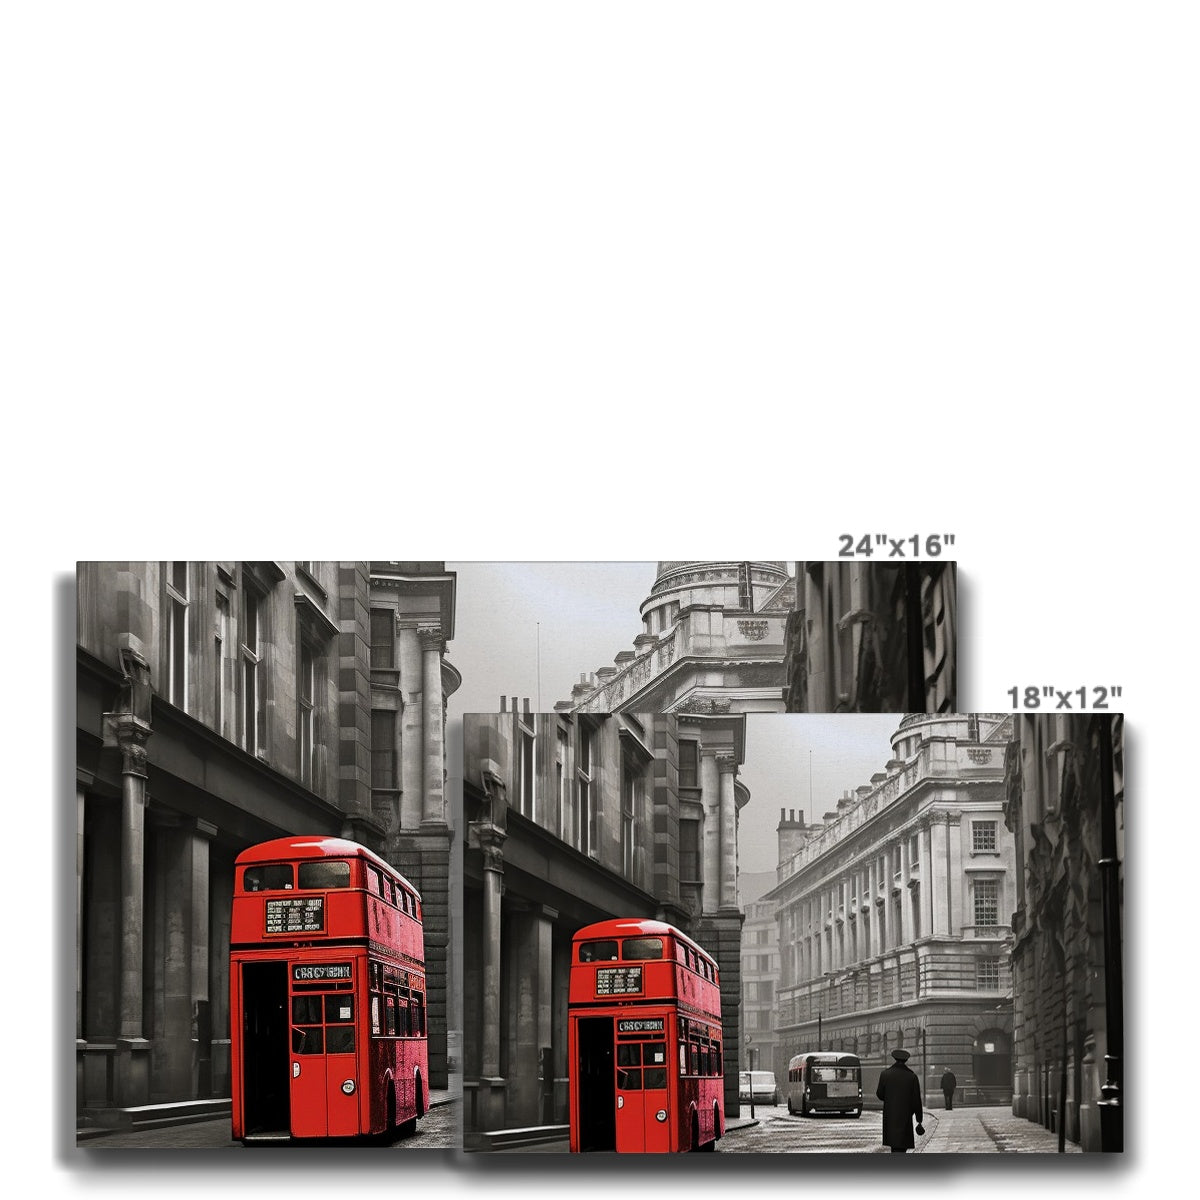 Red Bus To The City, London  Canvas